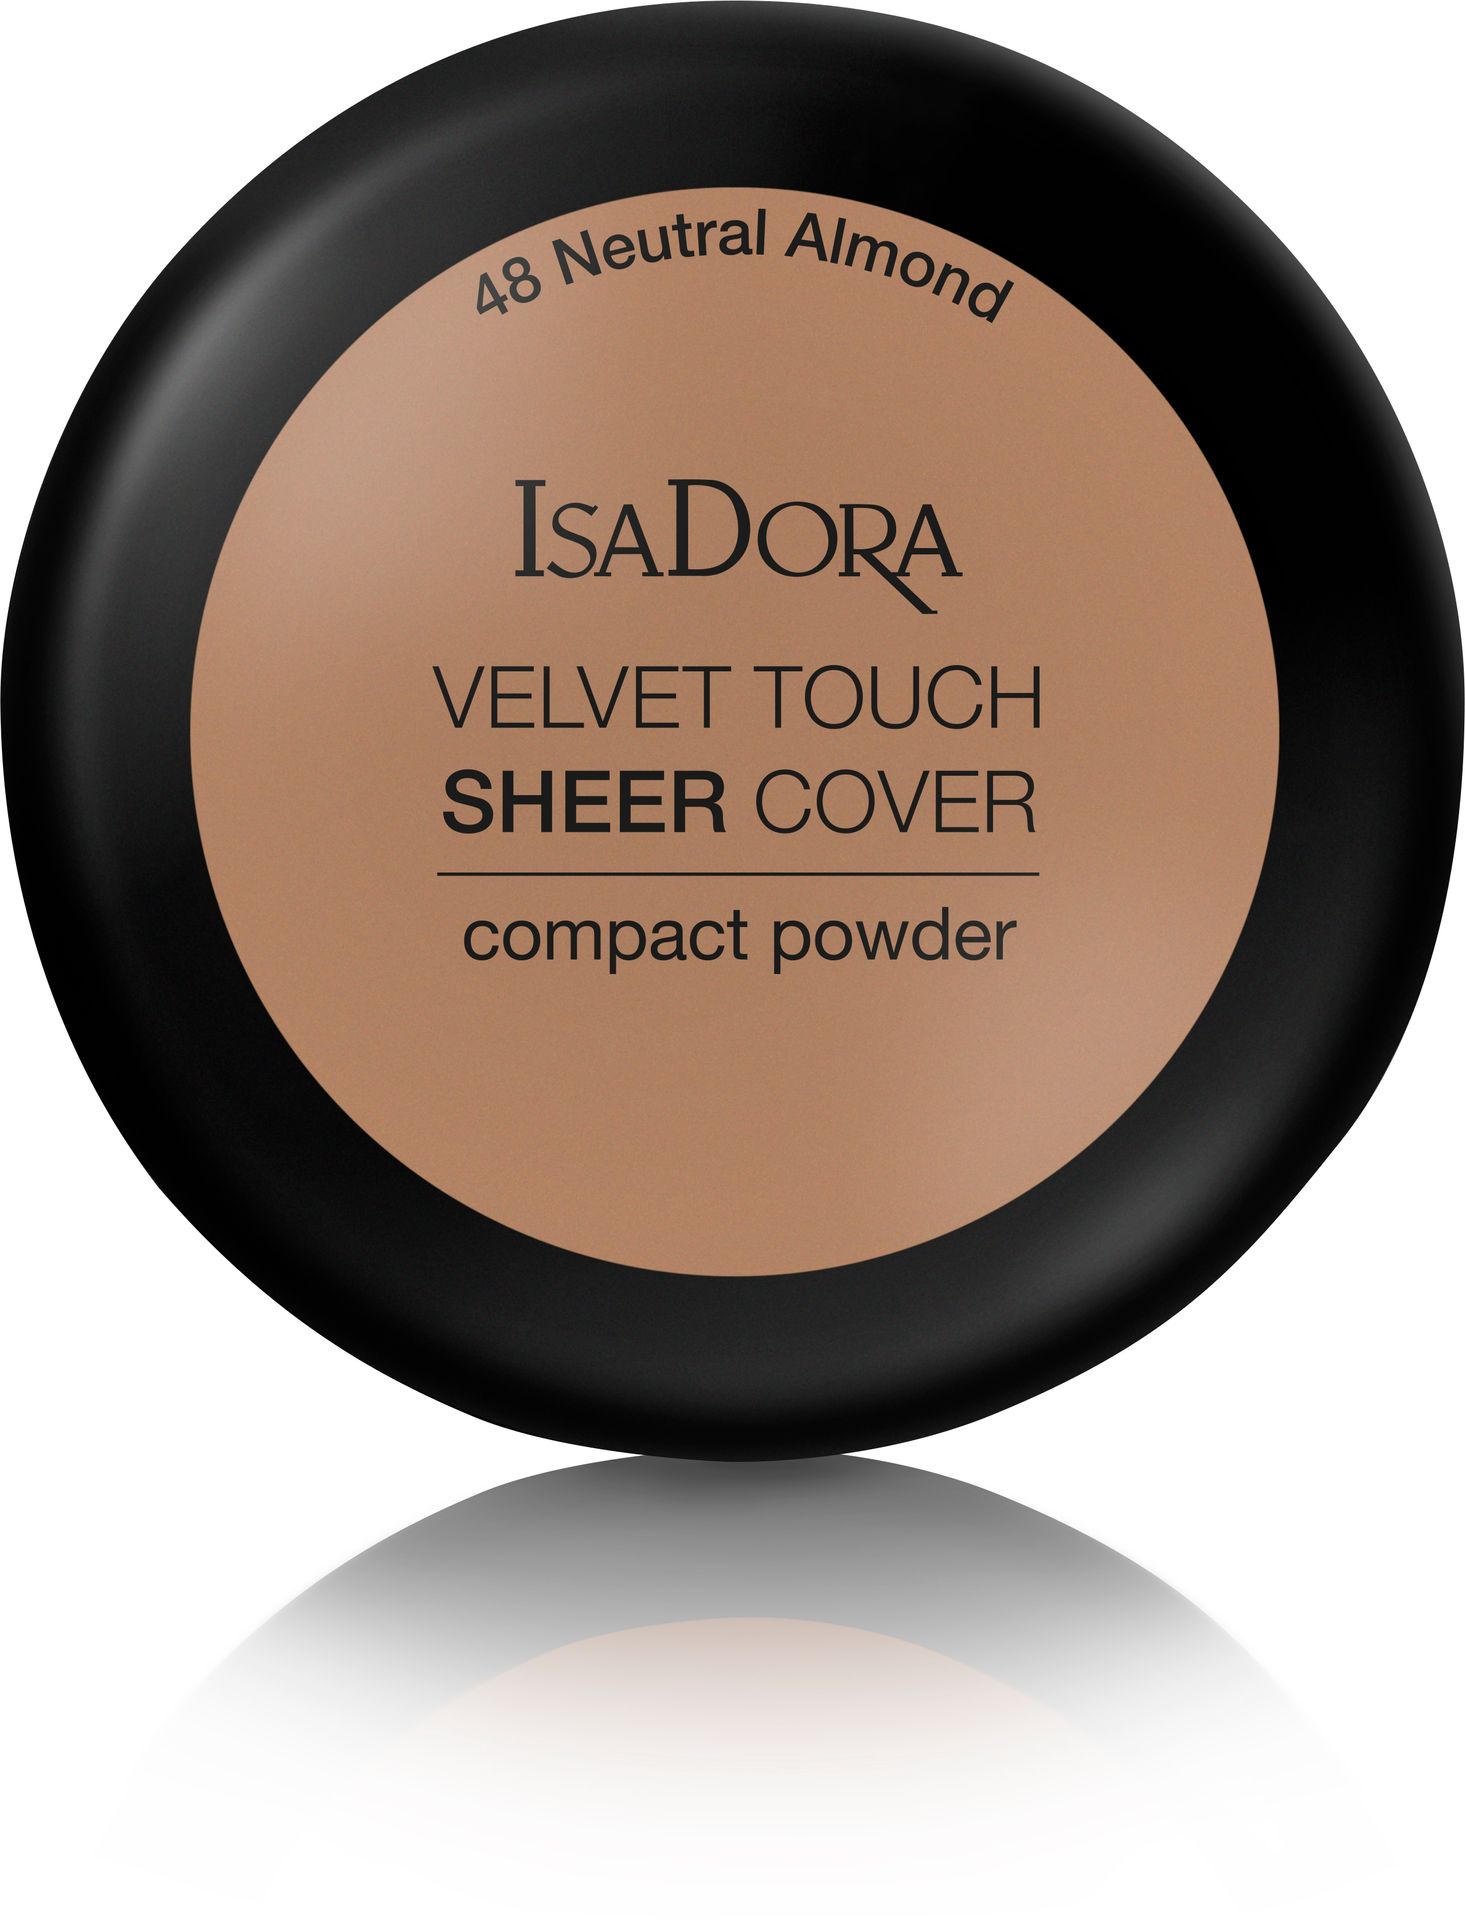 IsaDora Velvet Touch Sheer Cover Compact Powder 48 Neutral Almond